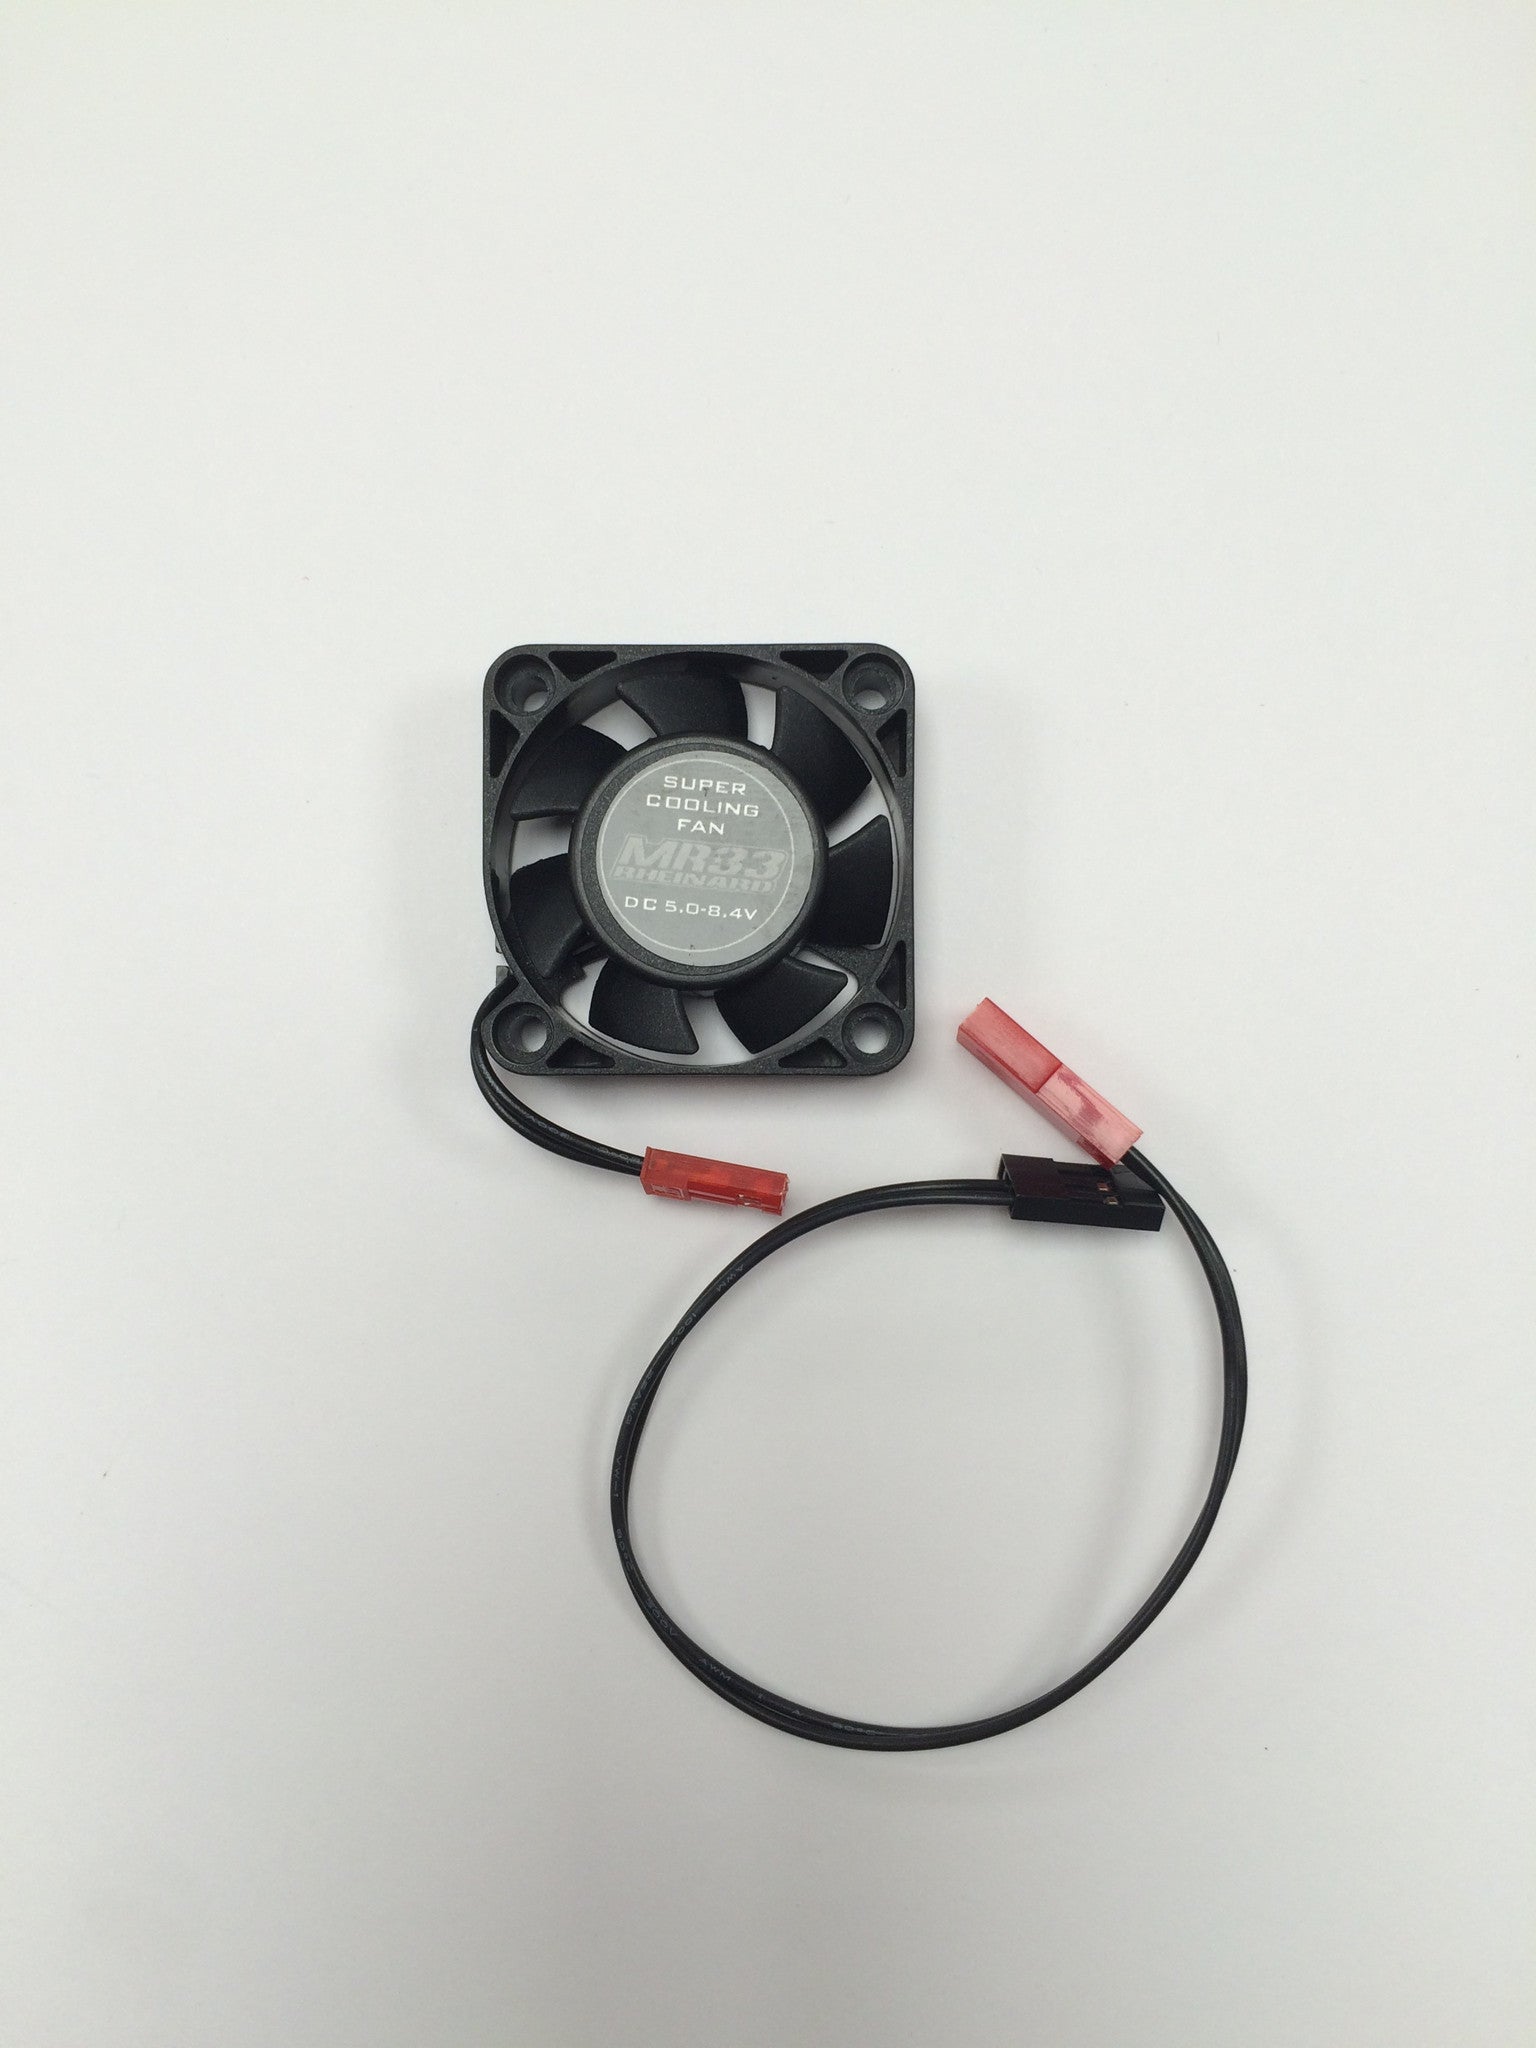 MR33 Cooling Fan 40mm with extend cable - RACERC